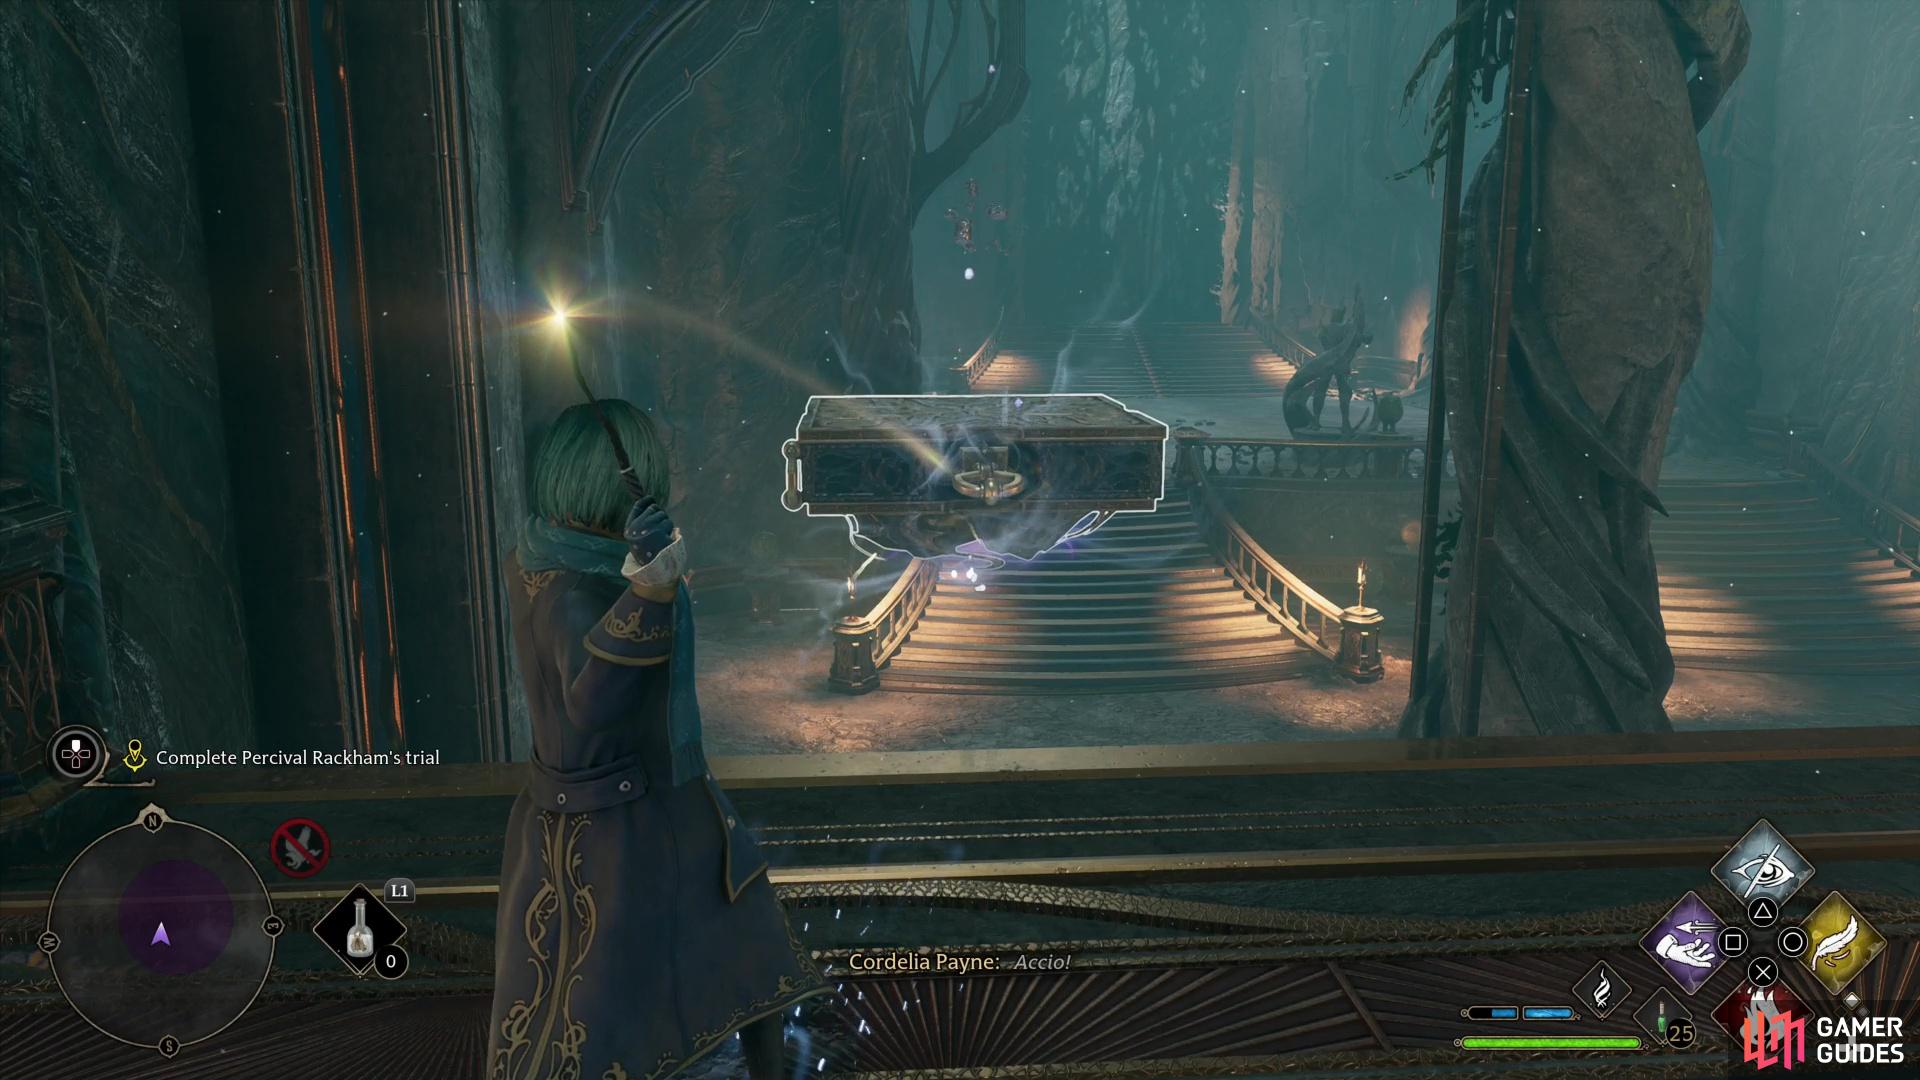 Use !Accio to pull a floating platform towards the footbridge, where it'll allow you to access an arcane magic nexus.